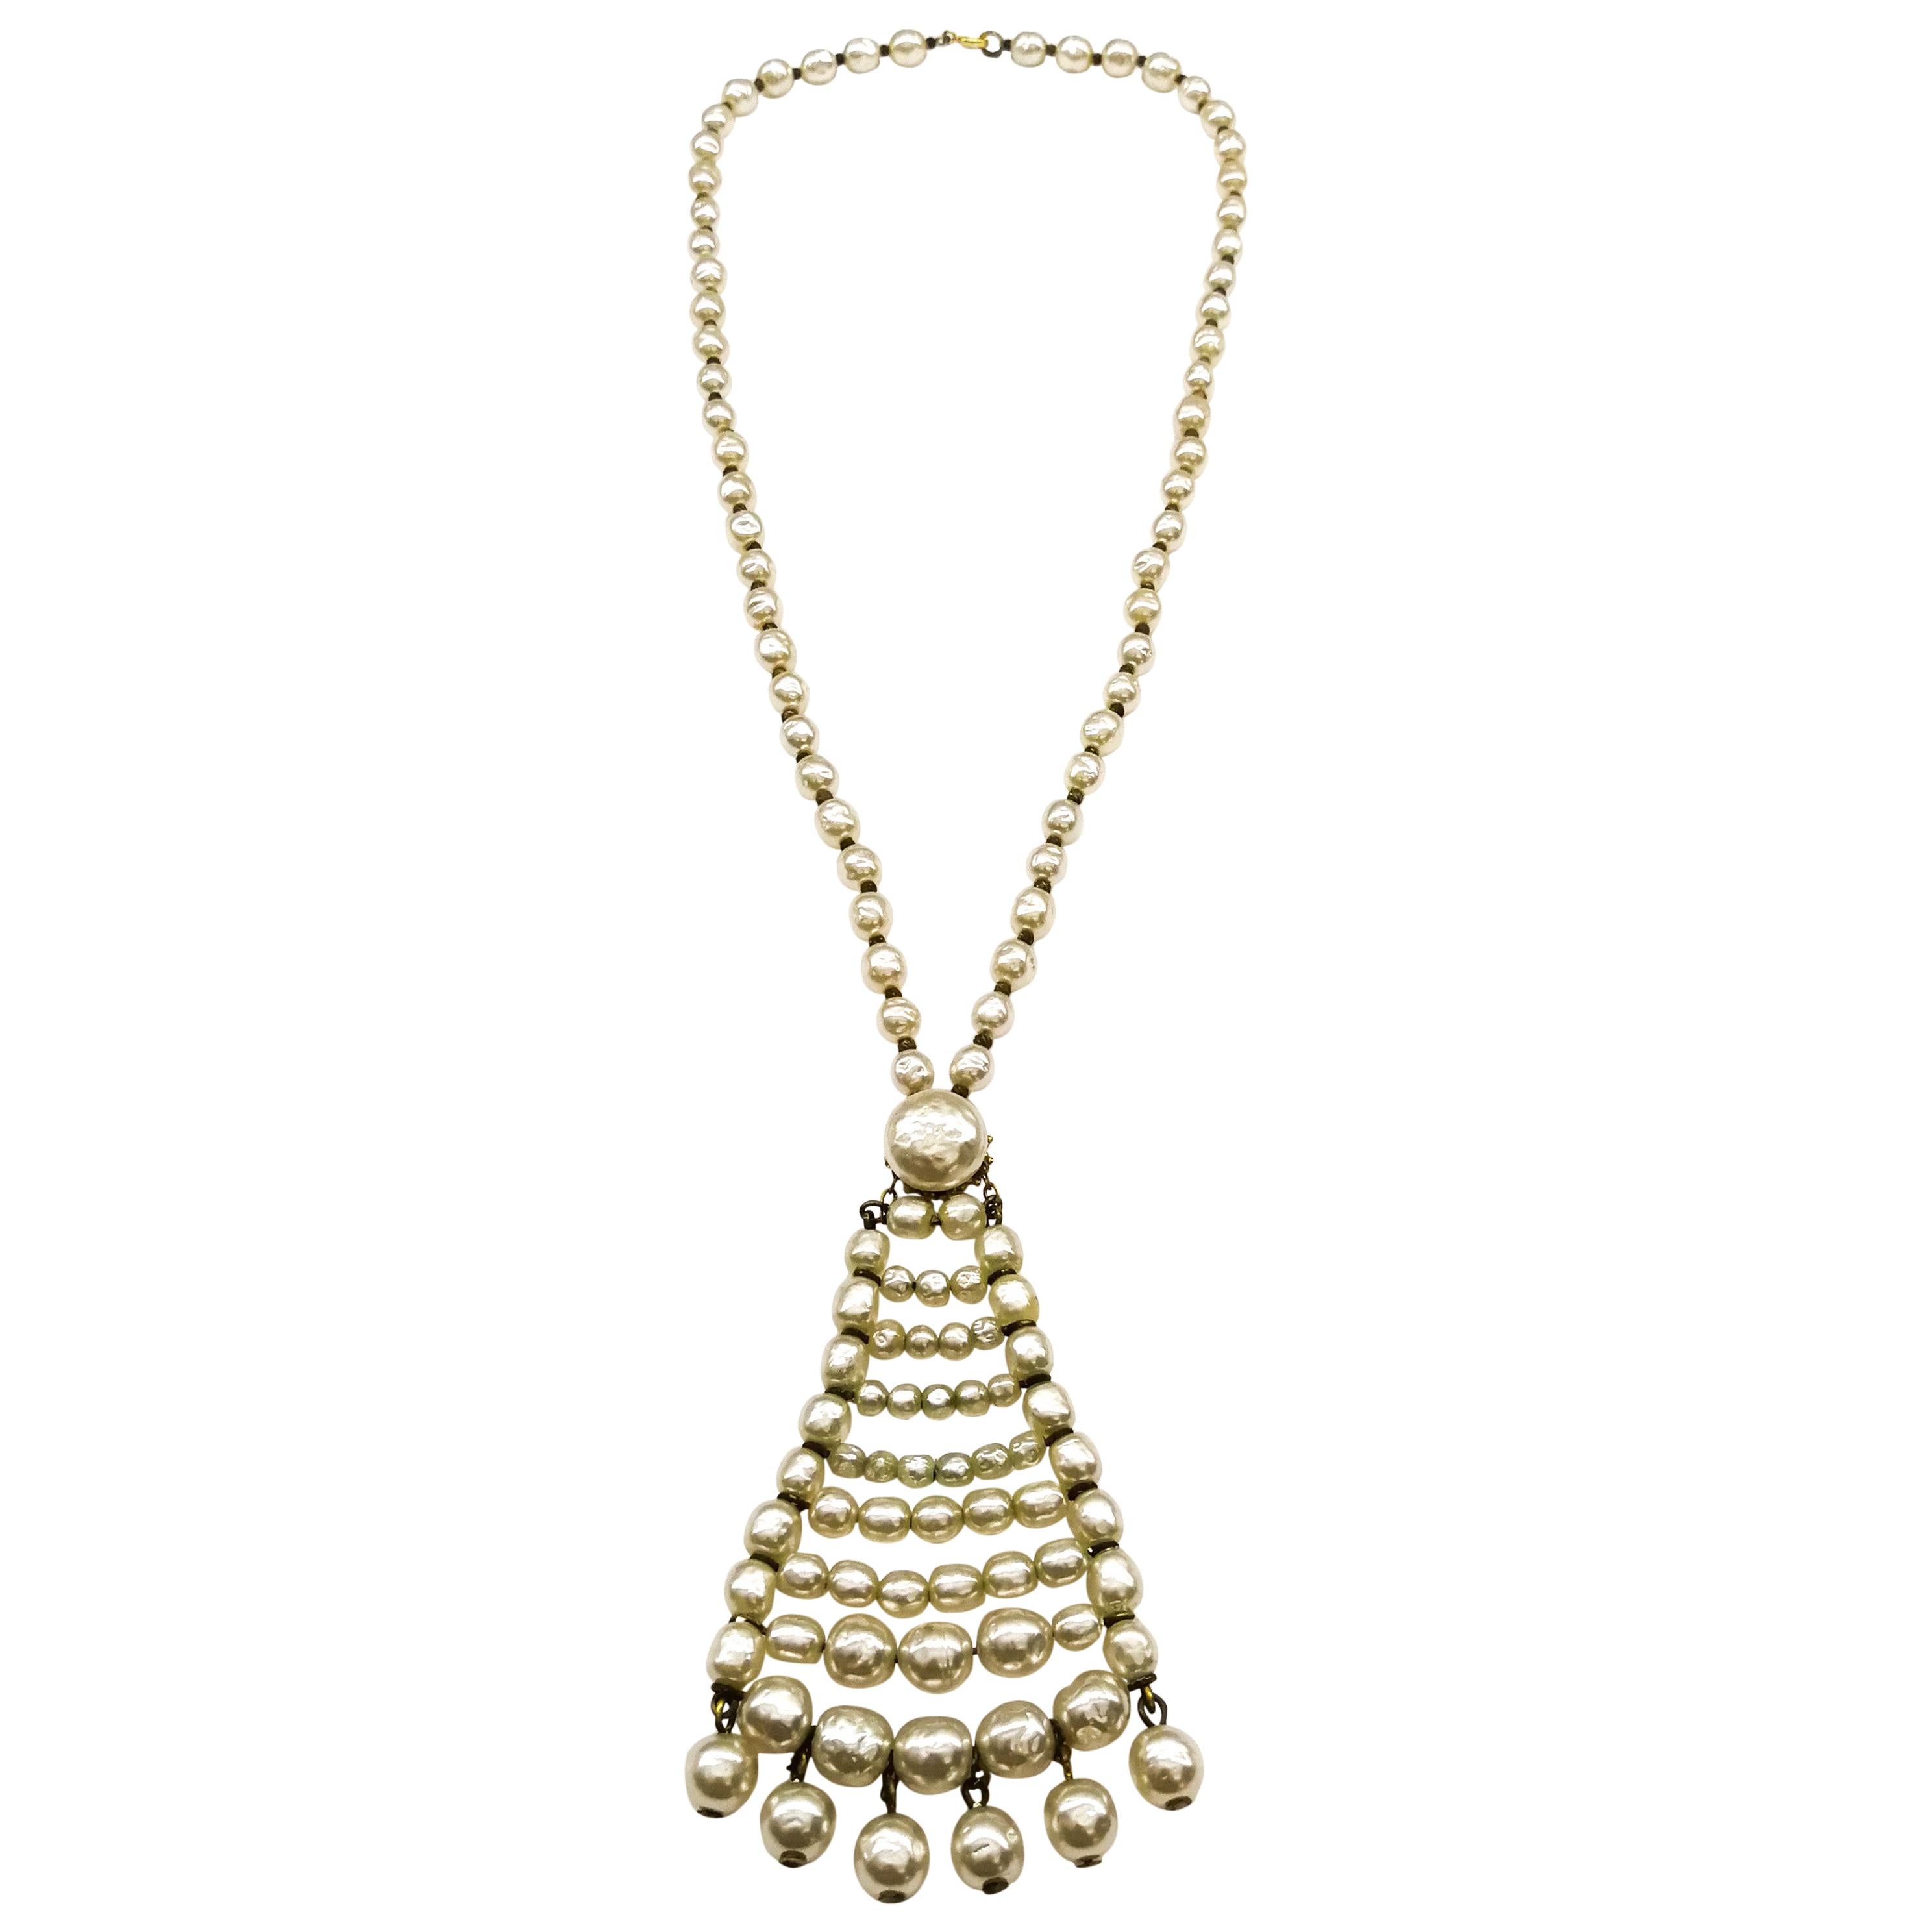 A long baroque pearl pendant necklace, Miriam Haskell, 1960s